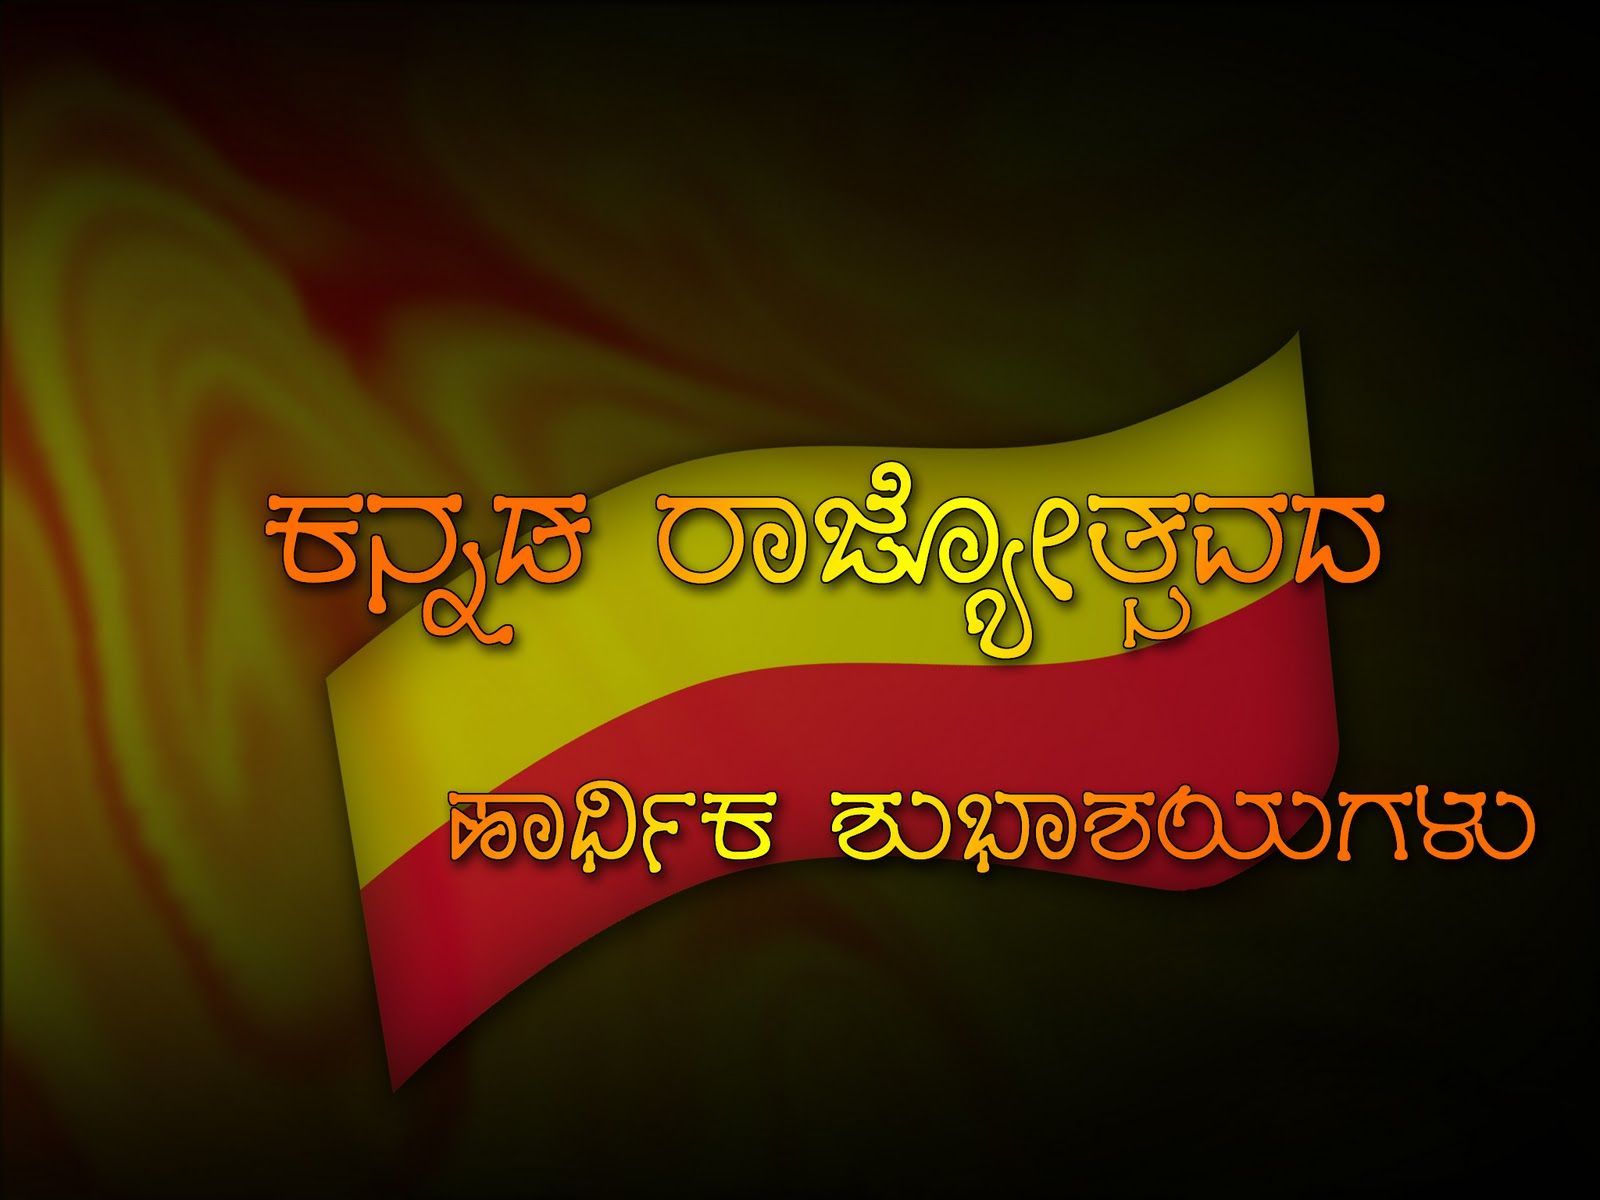 kannada wallpapers free download,text,font,yellow,graphic design,logo